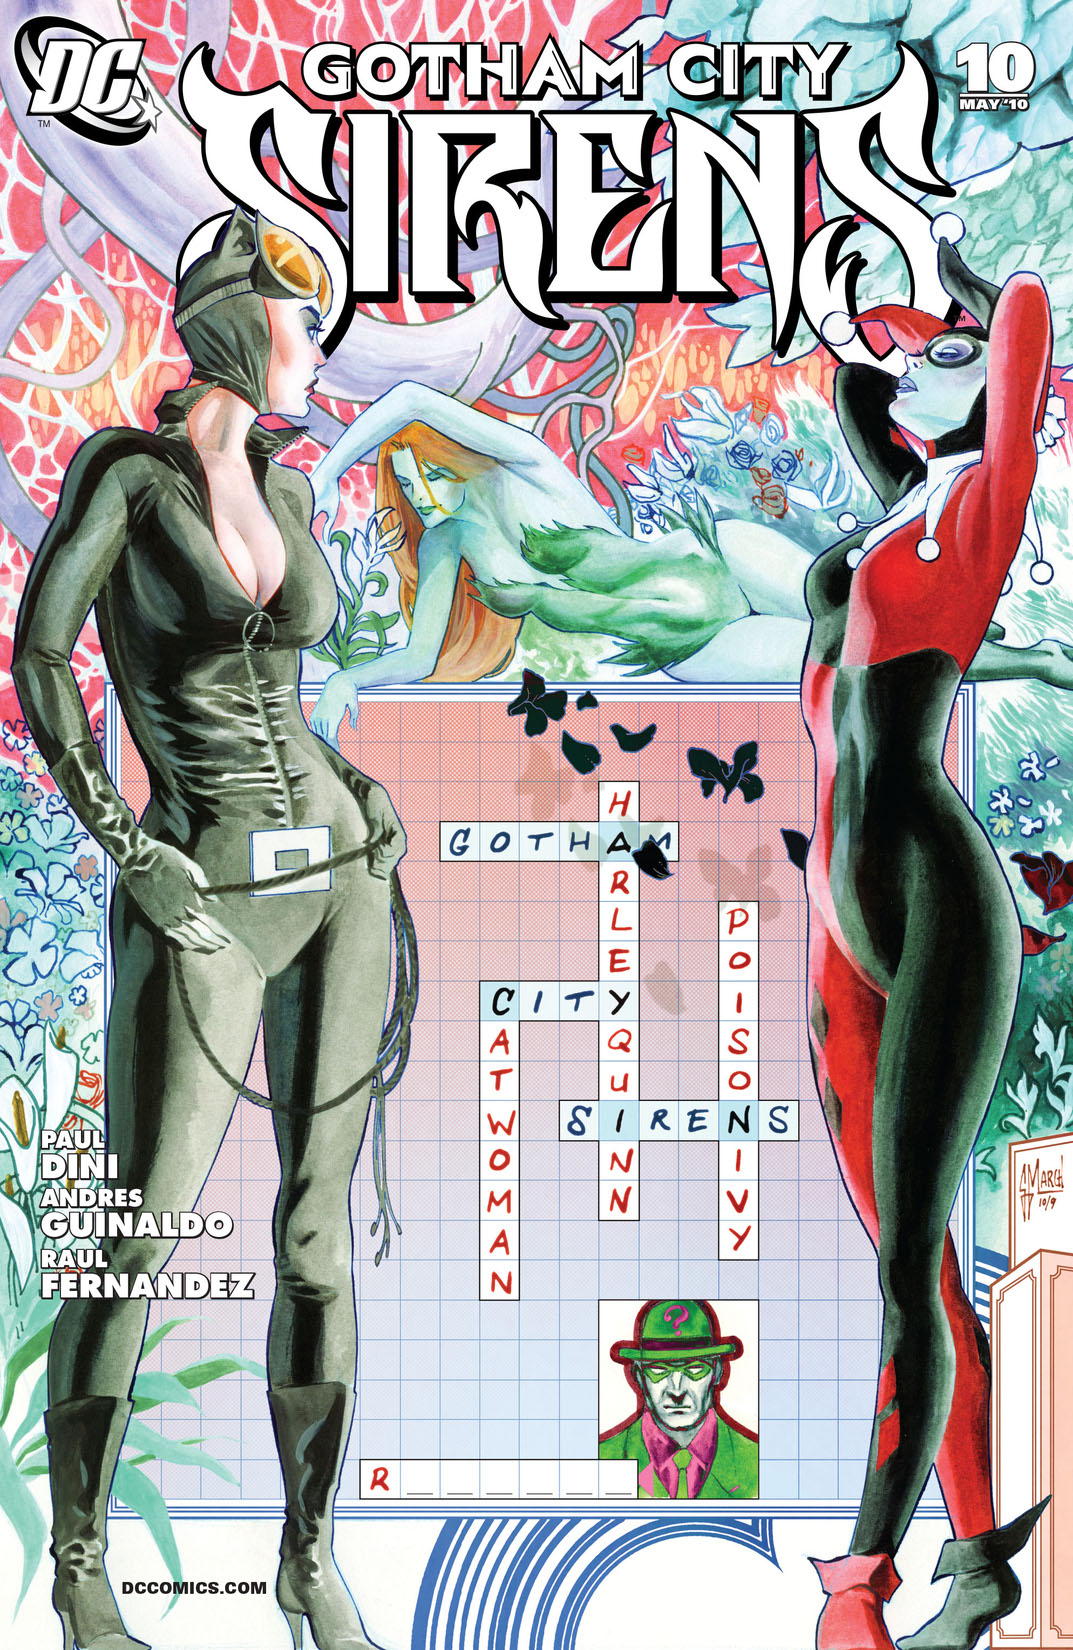 Gotham City Sirens #10 preview images